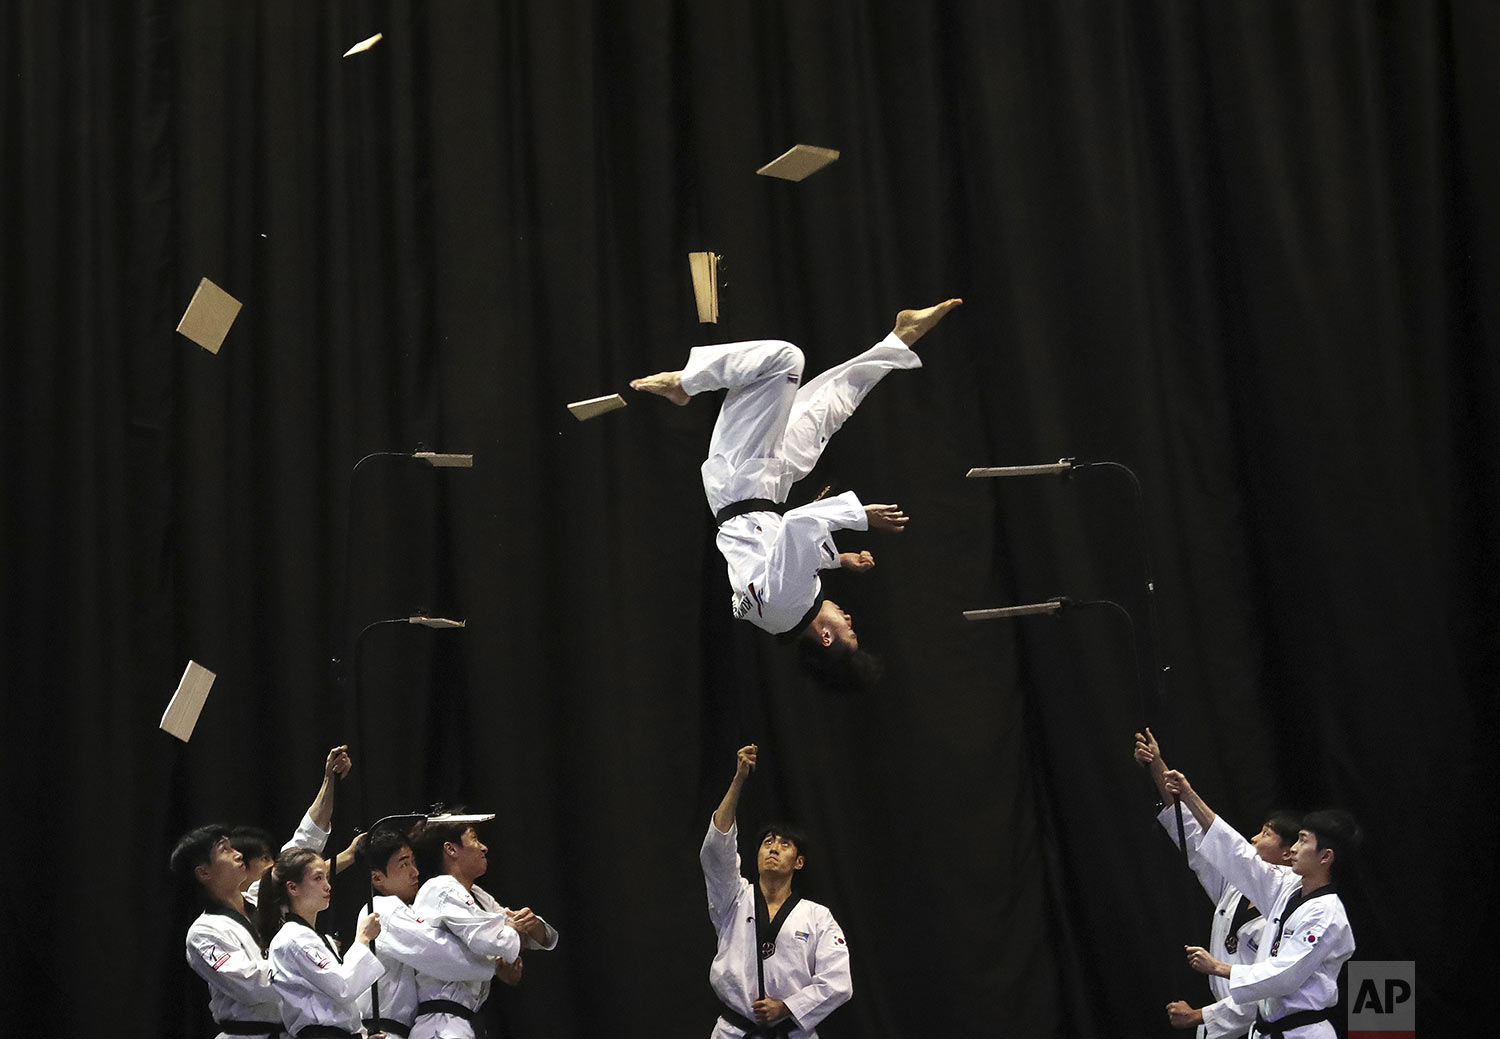  Members of the South Korean Taekwondo demonstration team perform during a visit by Bulgarian Prime Minister Boyko Borisov at Kukkiwon, the headquarters and academy of World Taekwondo, in Seoul, South Korea, Wednesday, Sept. 25, 2019. (AP Photo/Ahn Y